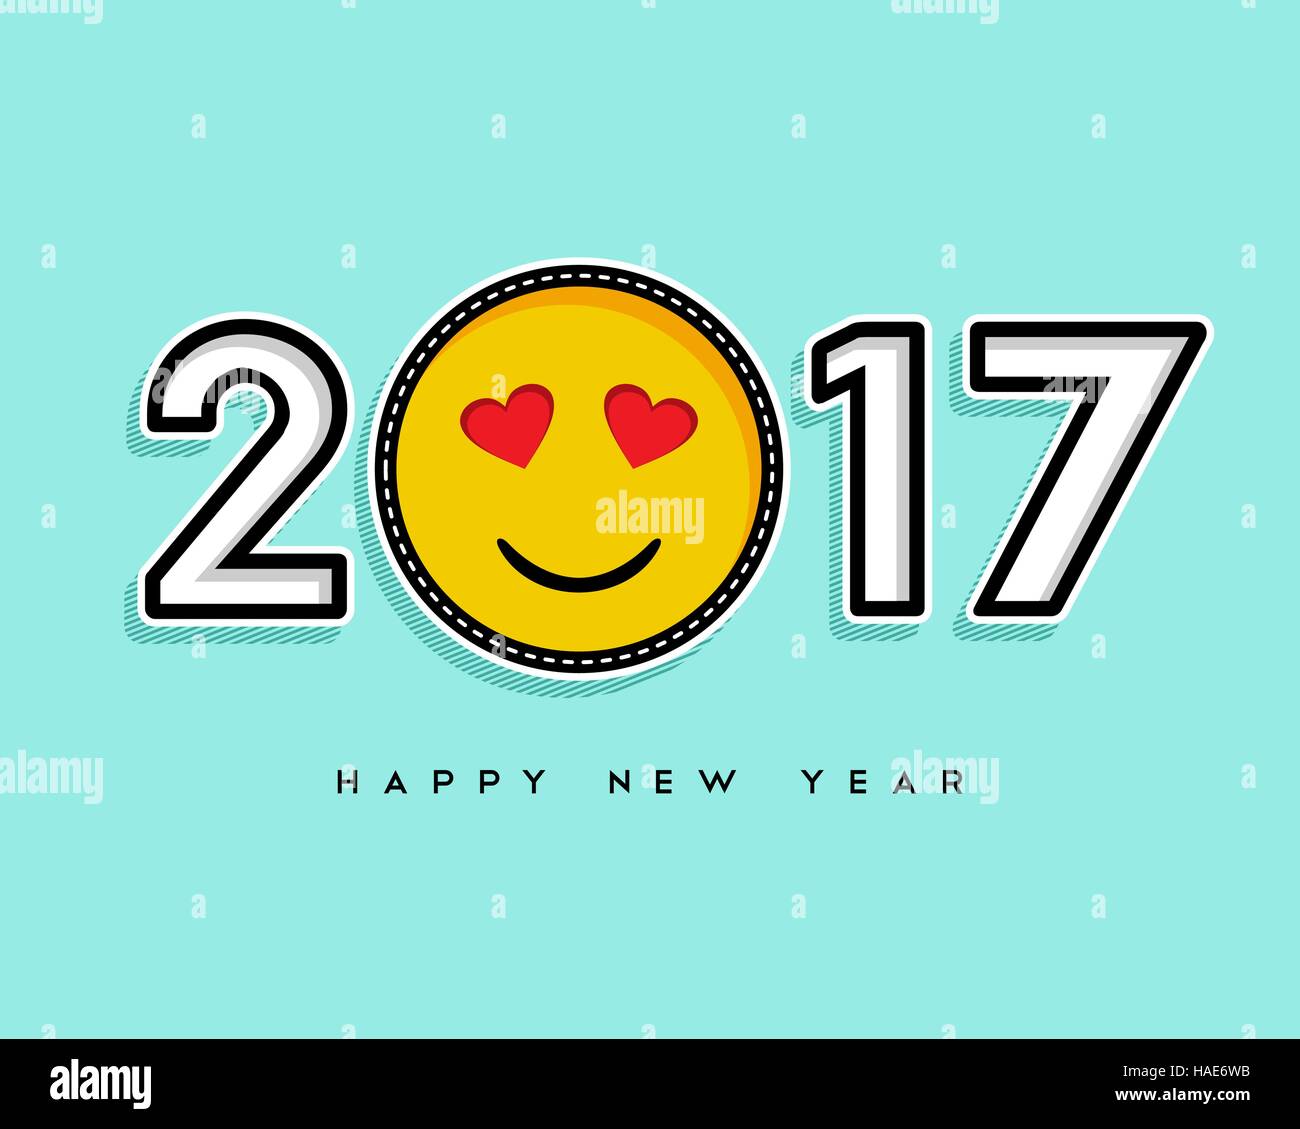 Happy New Year 2017 greeting card design with trendy stitch patch emoji icon as number. EPS10 vector. Stock Vector